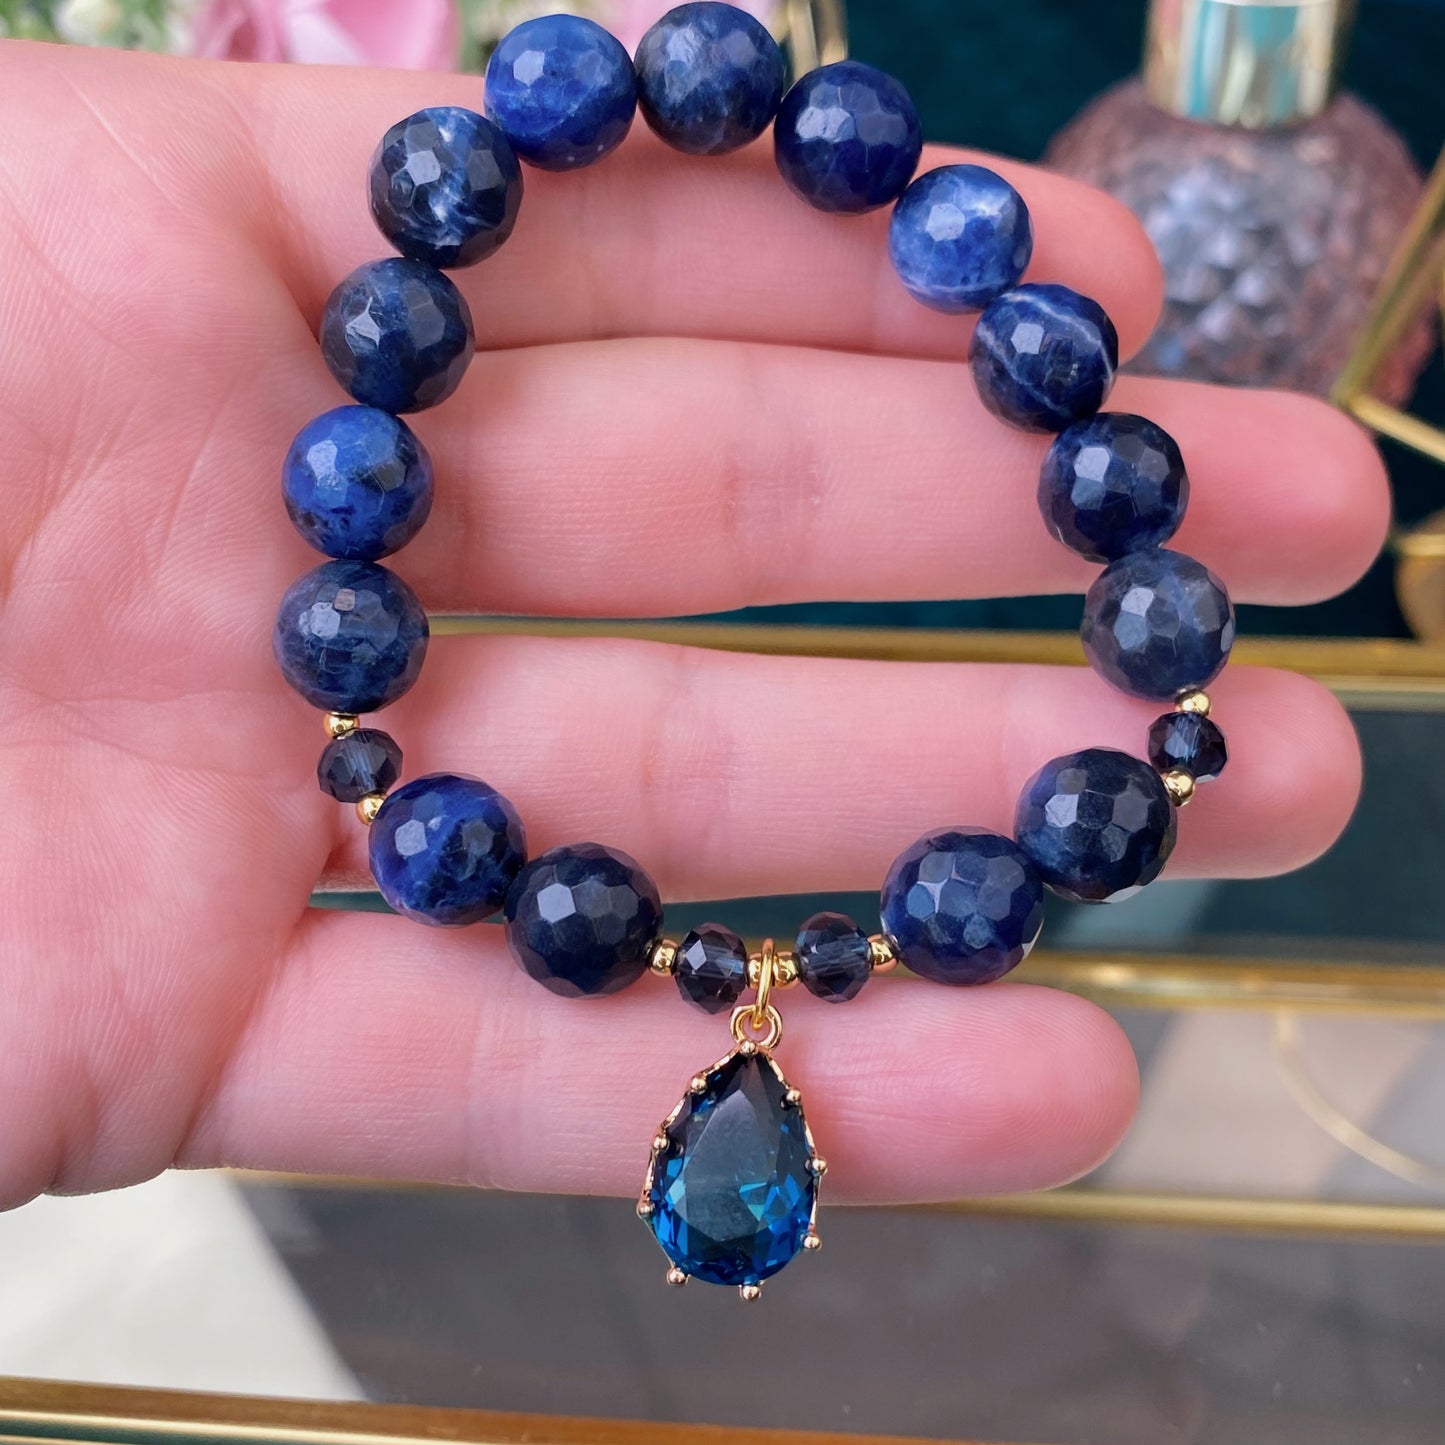 Sodalite bracelet (Sodalite, polished shape, 10mm.For success, knowledge and luck.)